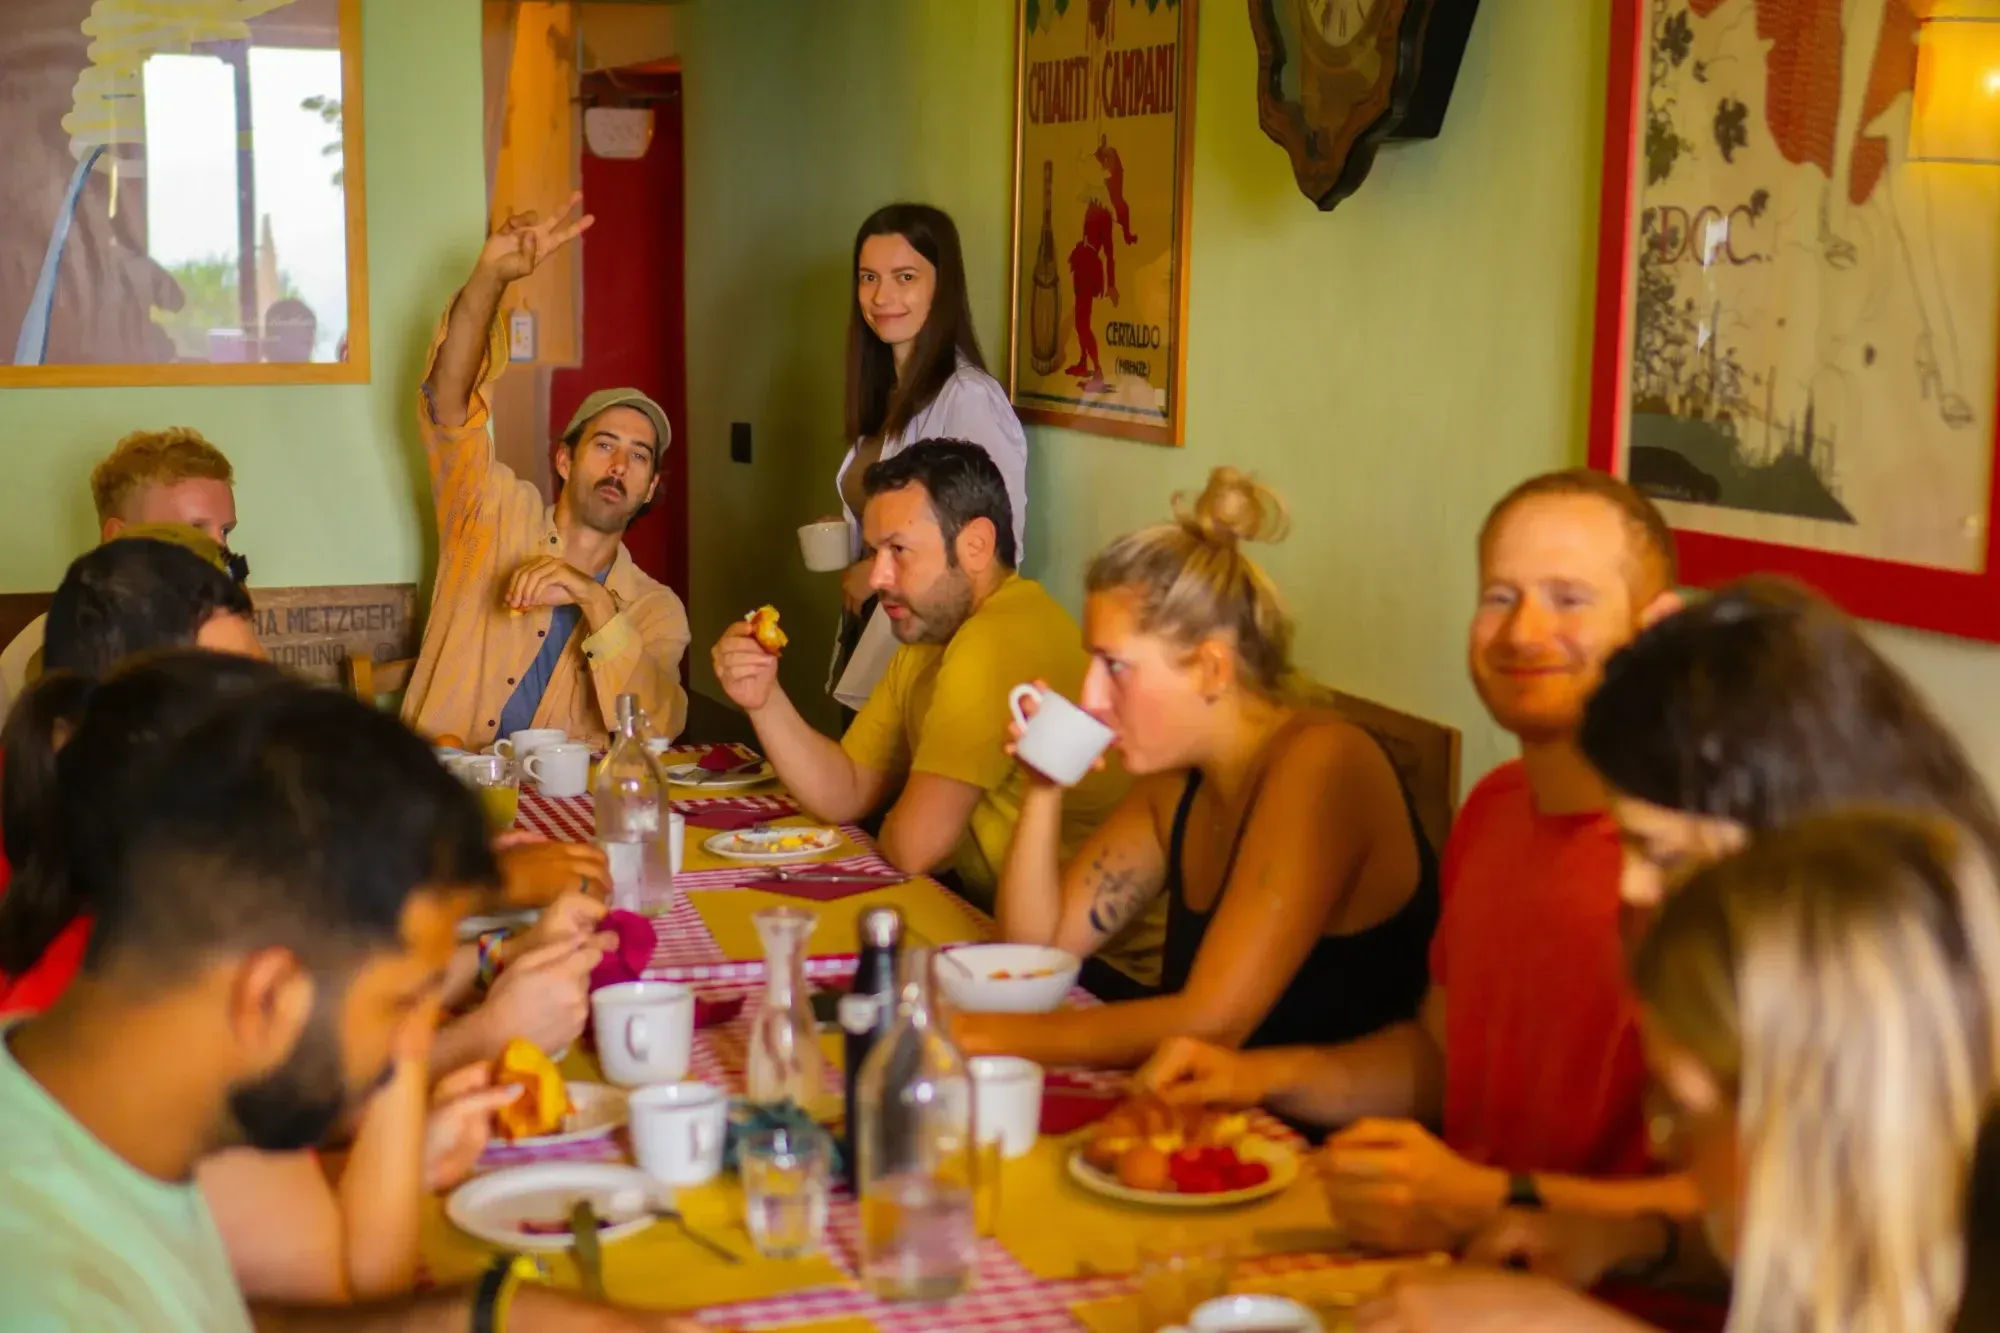 Ten people sitting on the breakfast table, eating and drinking. One man looking into the camera, raising his arm and showing a peace sign, woman to his right is holding a cup and smiling. 